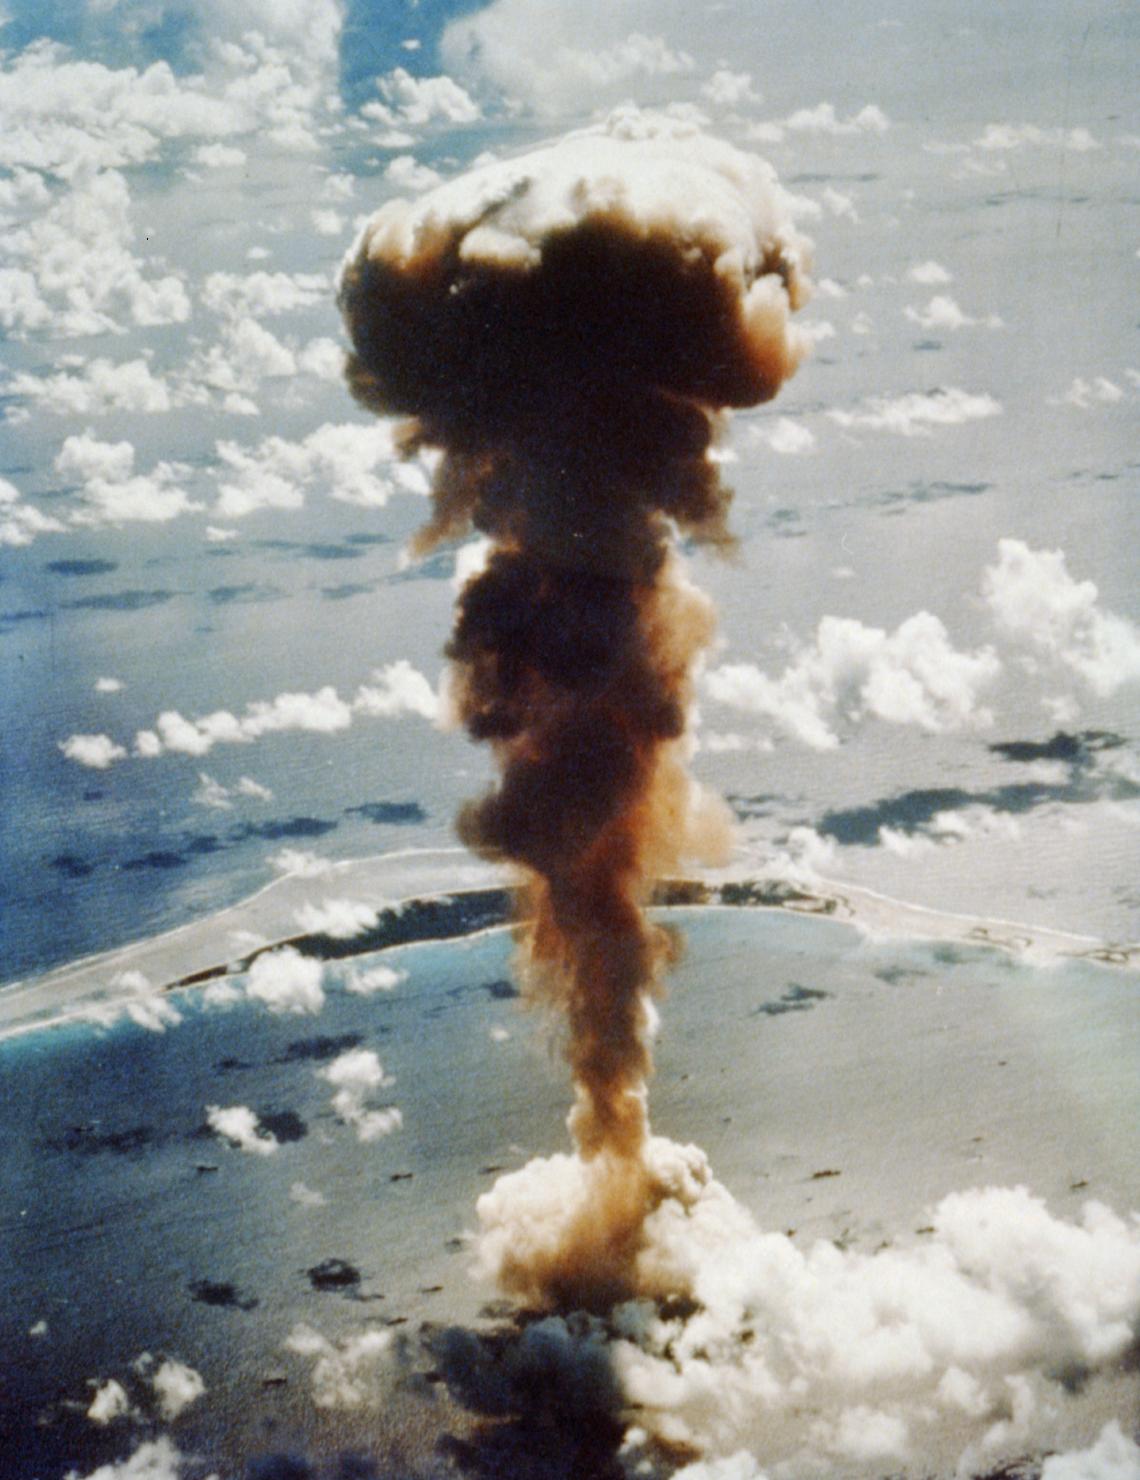 Morbid Researchers Imagine A ‘Best-Case Scenario’ For Nuclear War, And The Results Are Grim